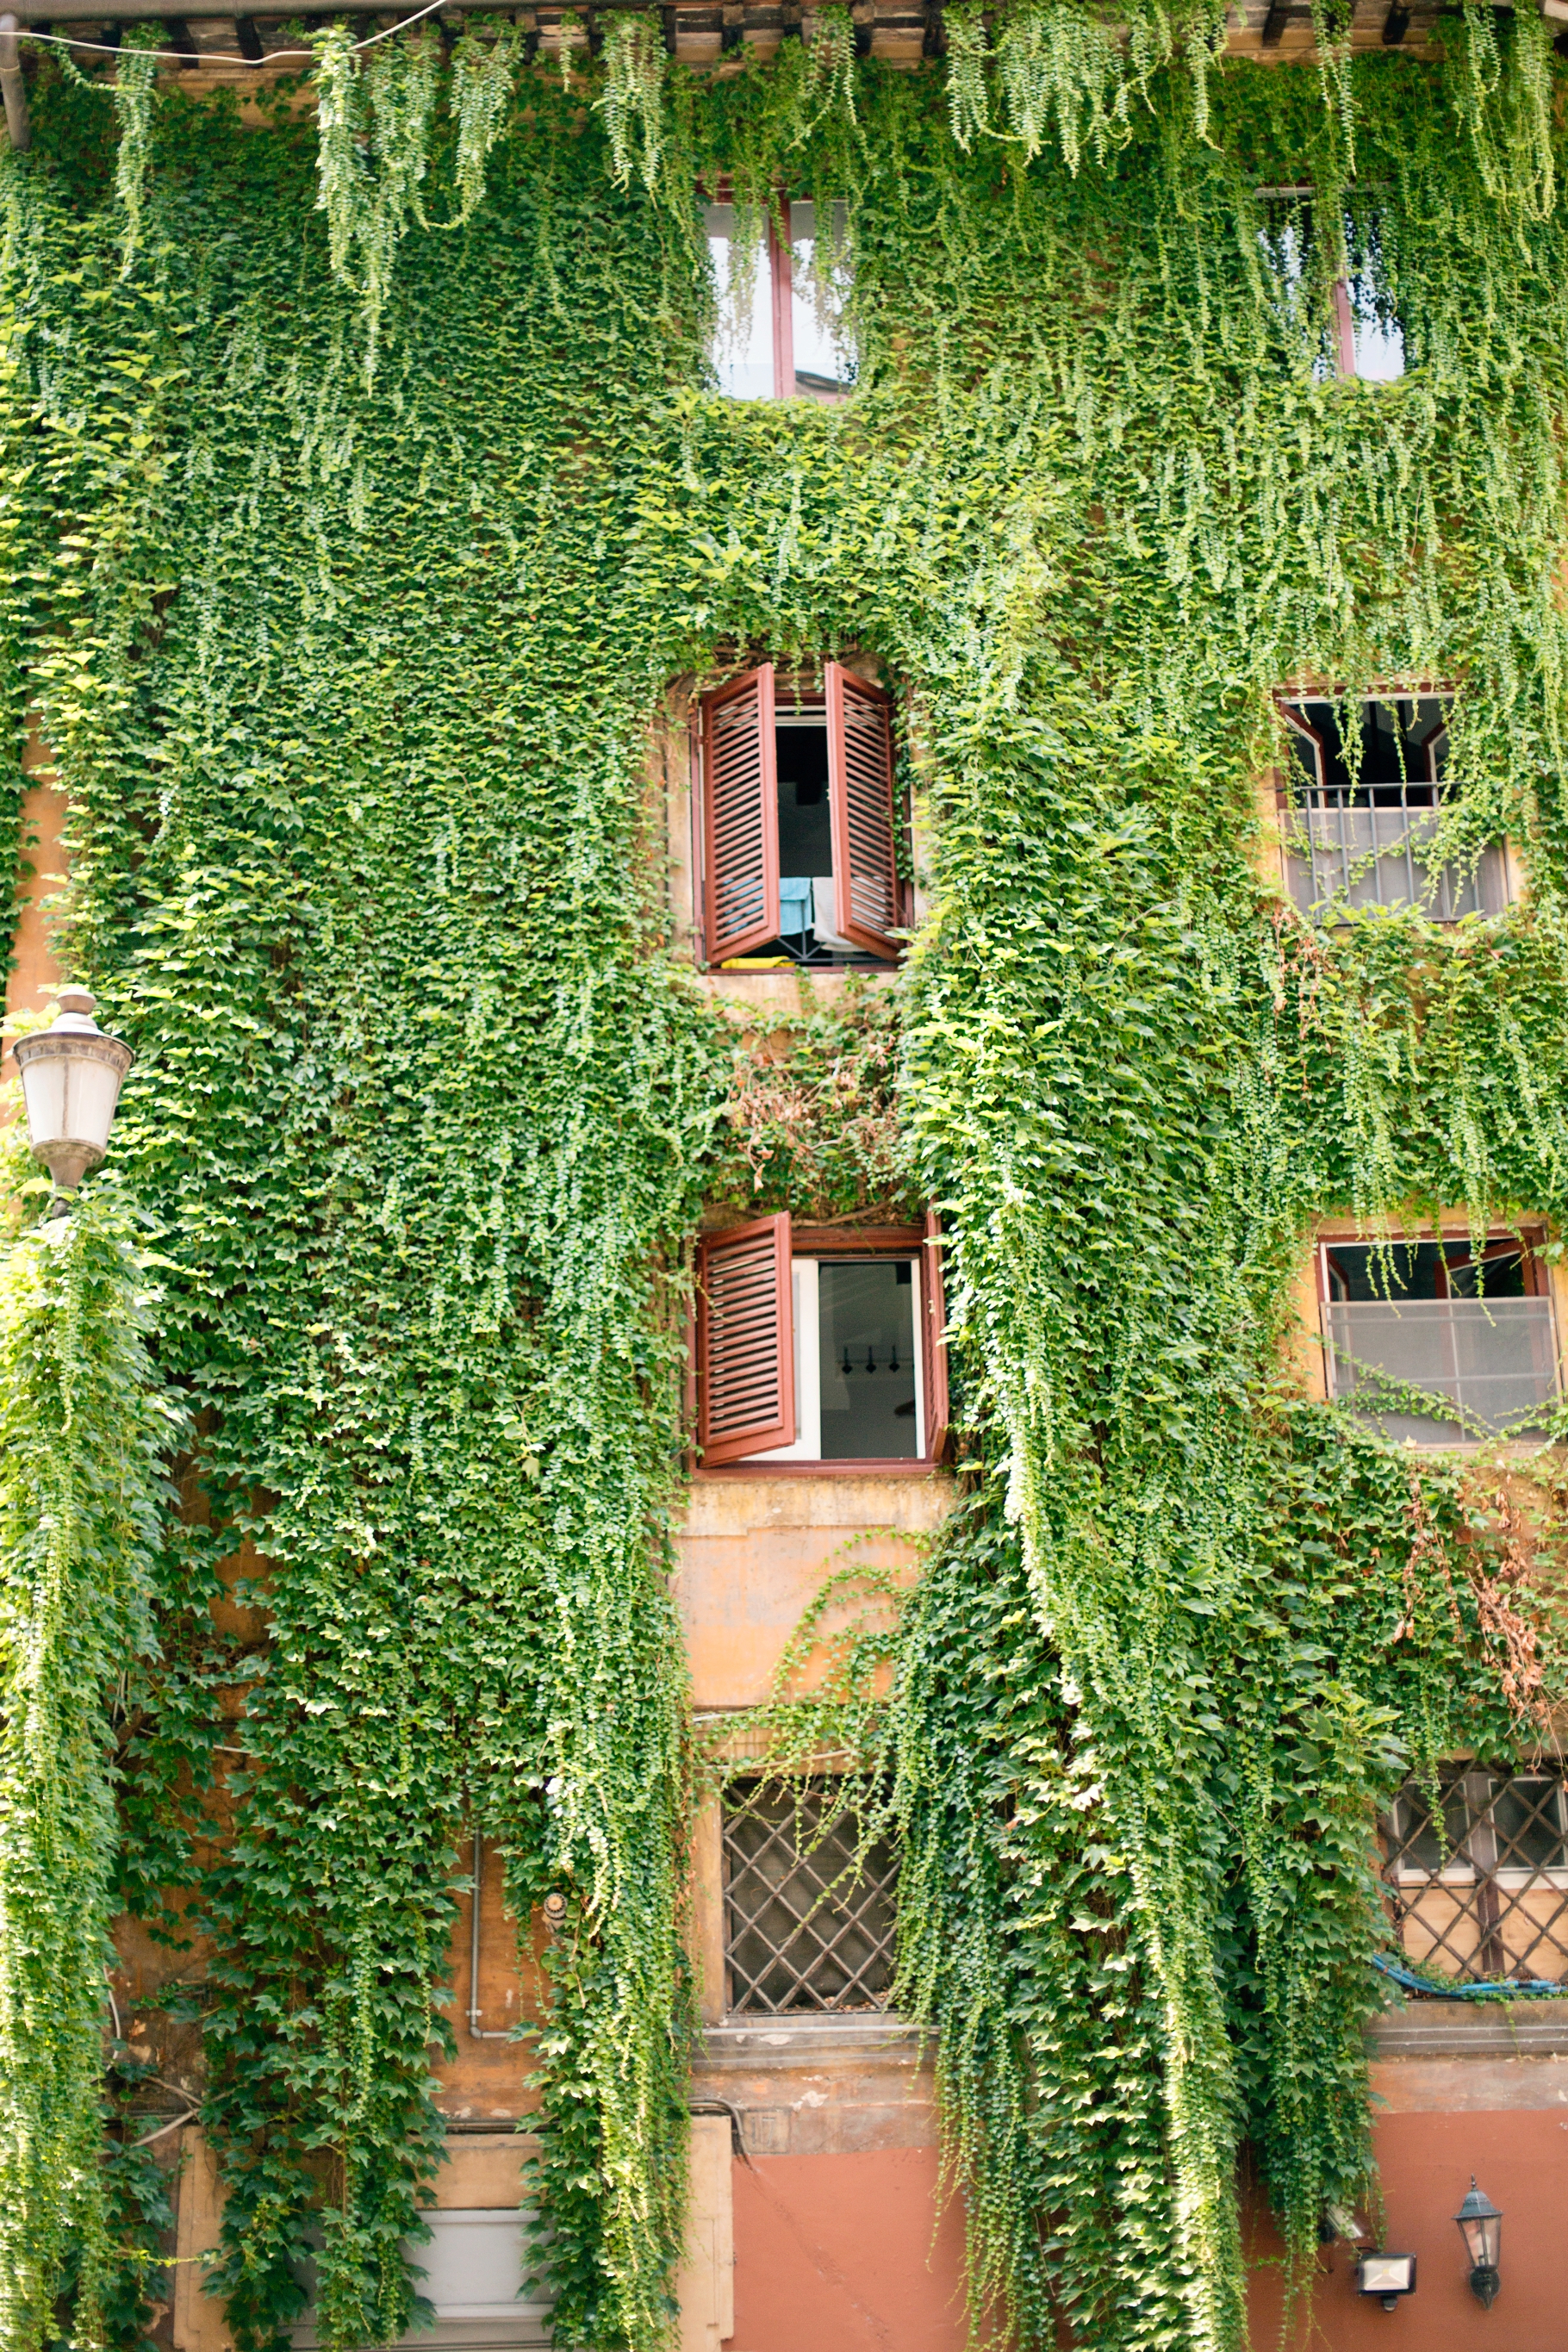 5-Ivy-old-buildings-Rome-Italy-Europe-Travel-Anniversary-Trip-Photography-by-Betty-Elaine